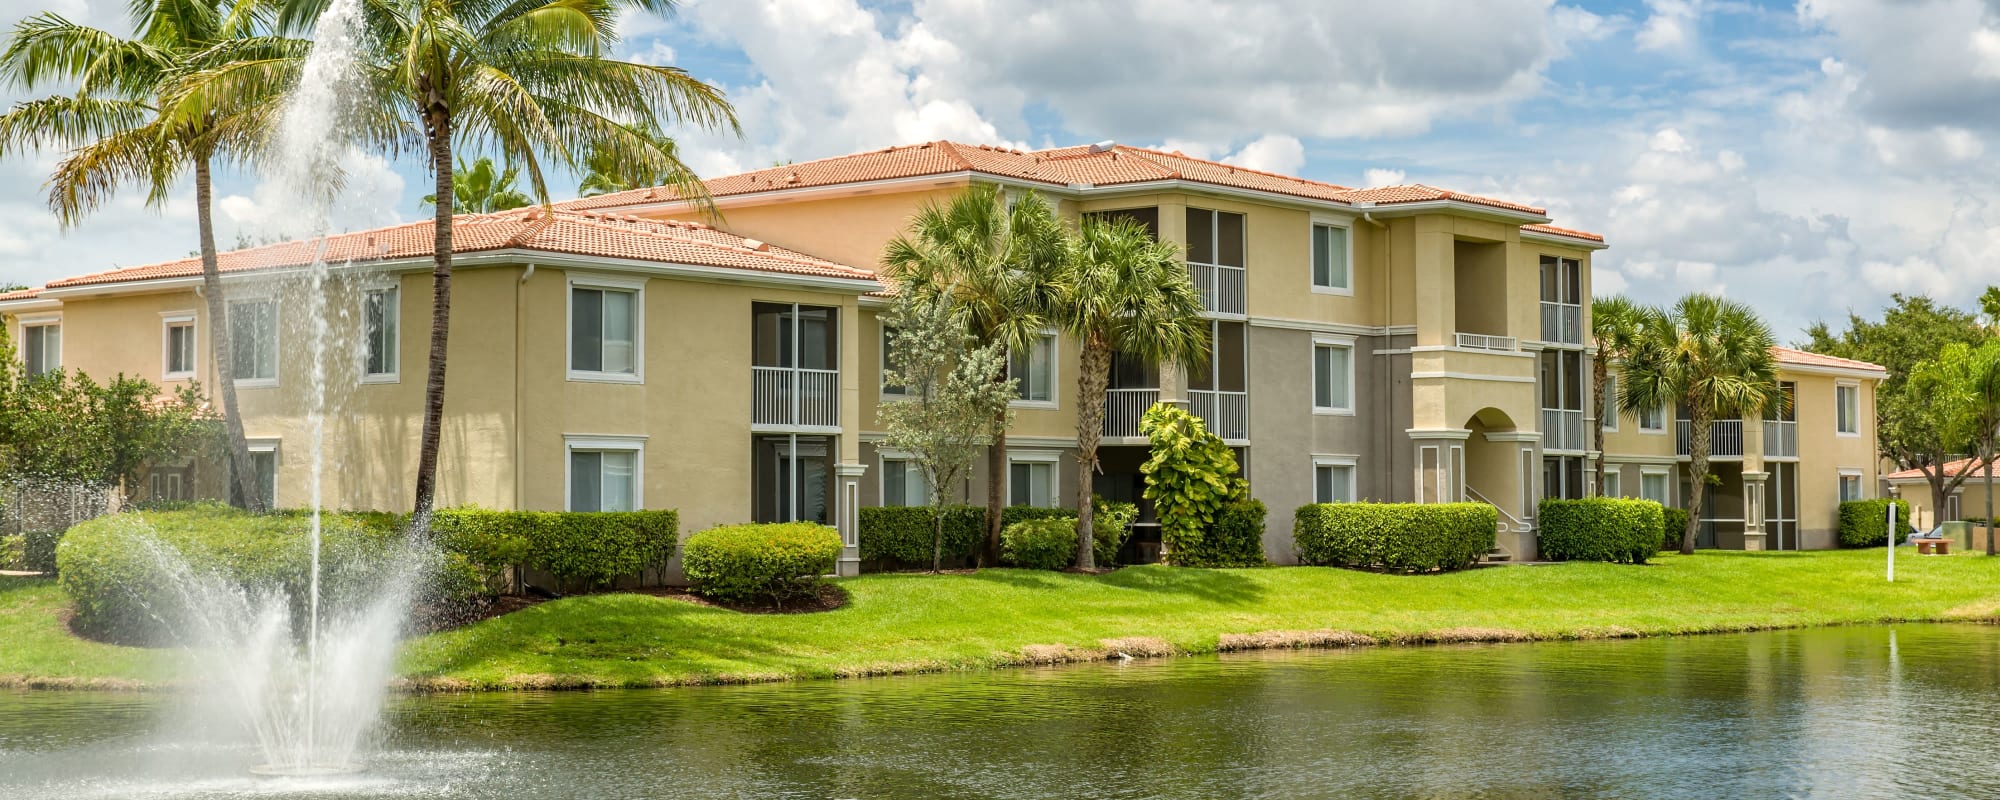 Contact us at Ibis Reserve Apartments in West Palm Beach, Florida